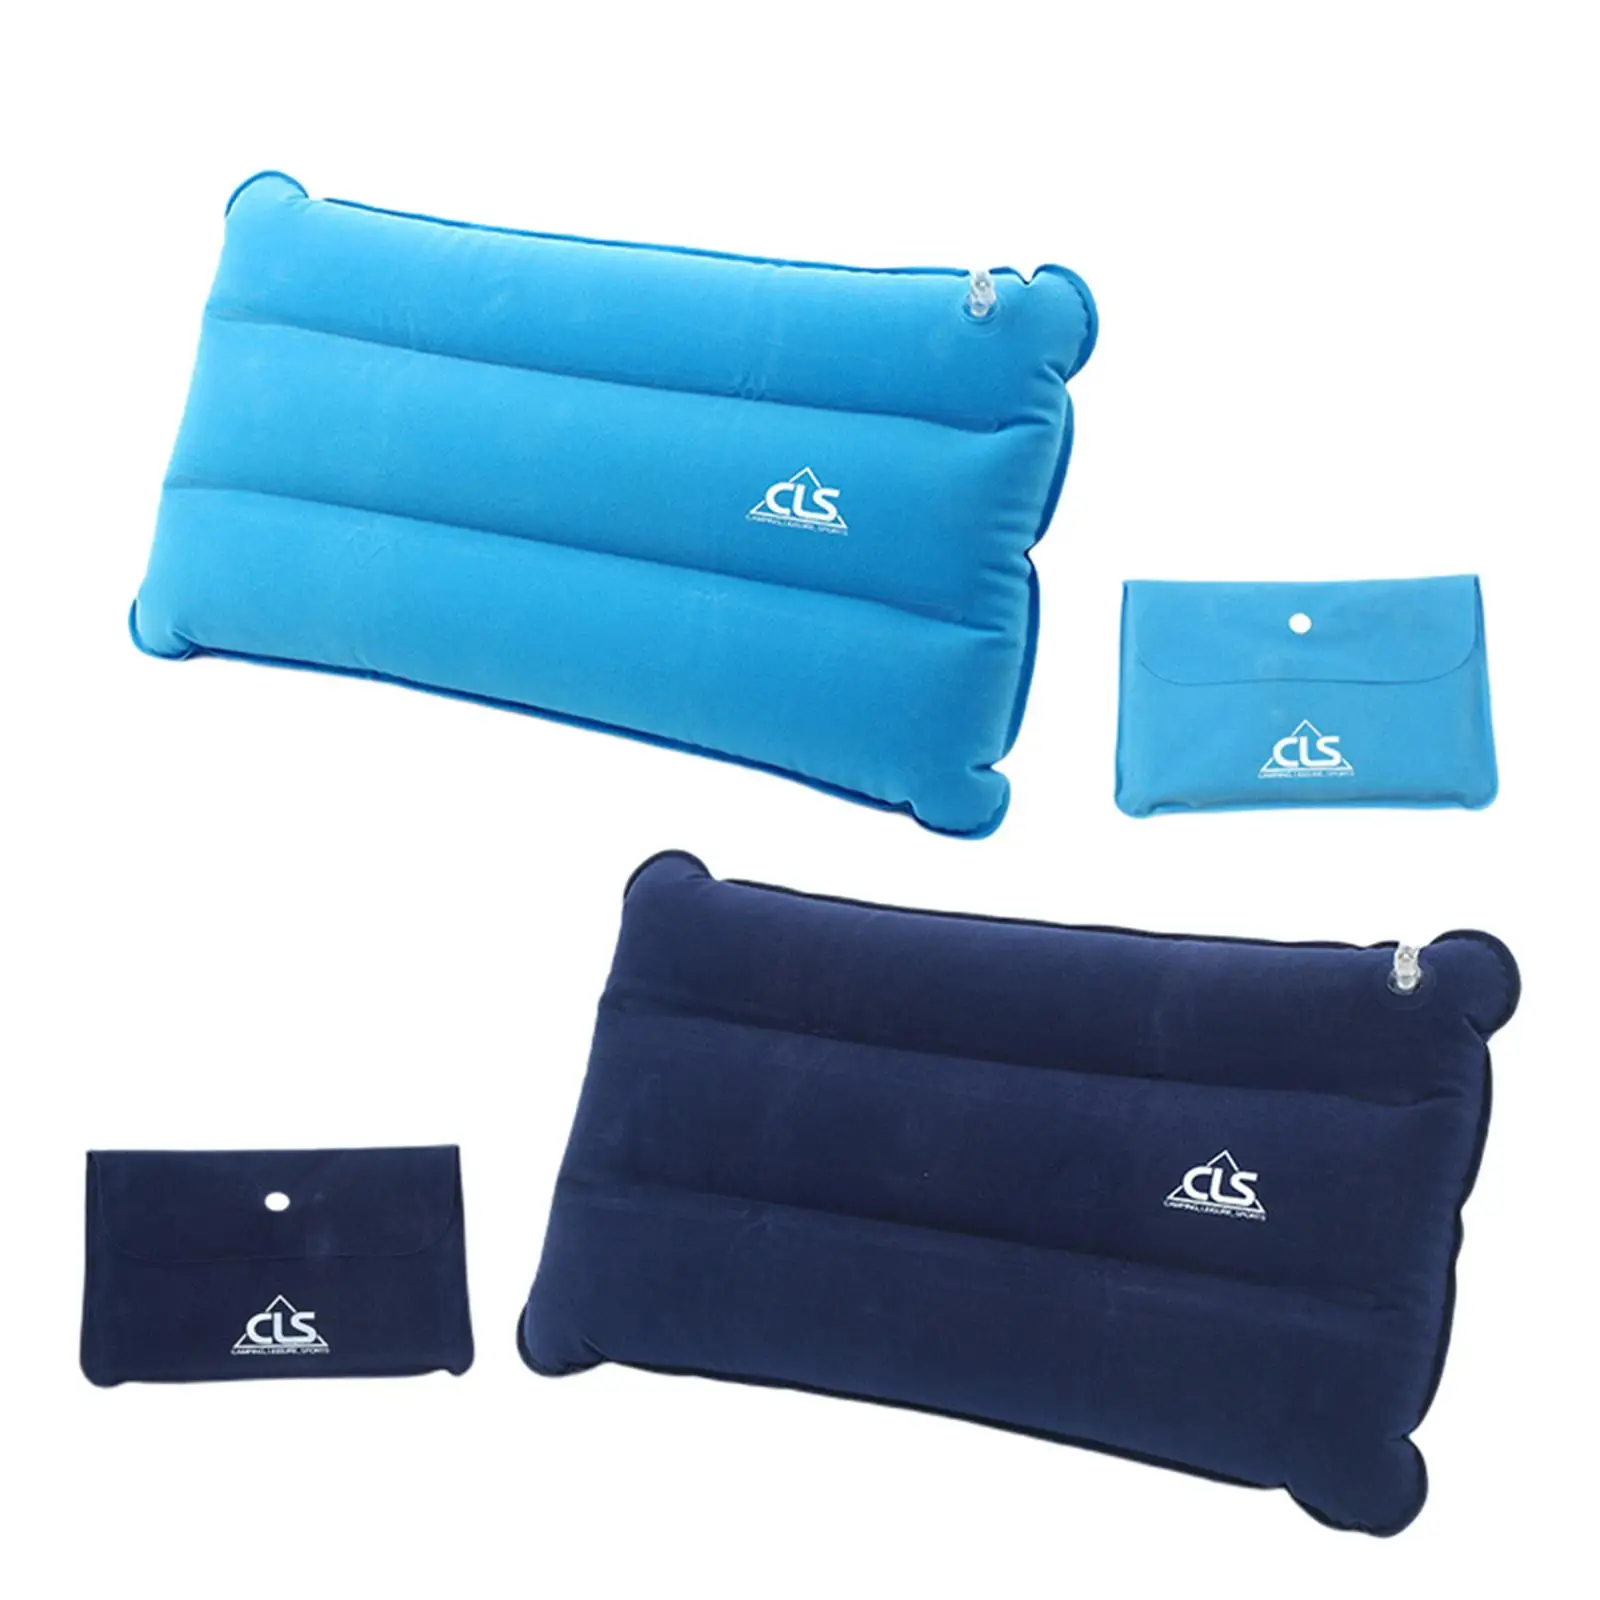 Inflated Pillows Compressed Folding Non-slip Pillow Suede Fabric Use For Travel Outdoor